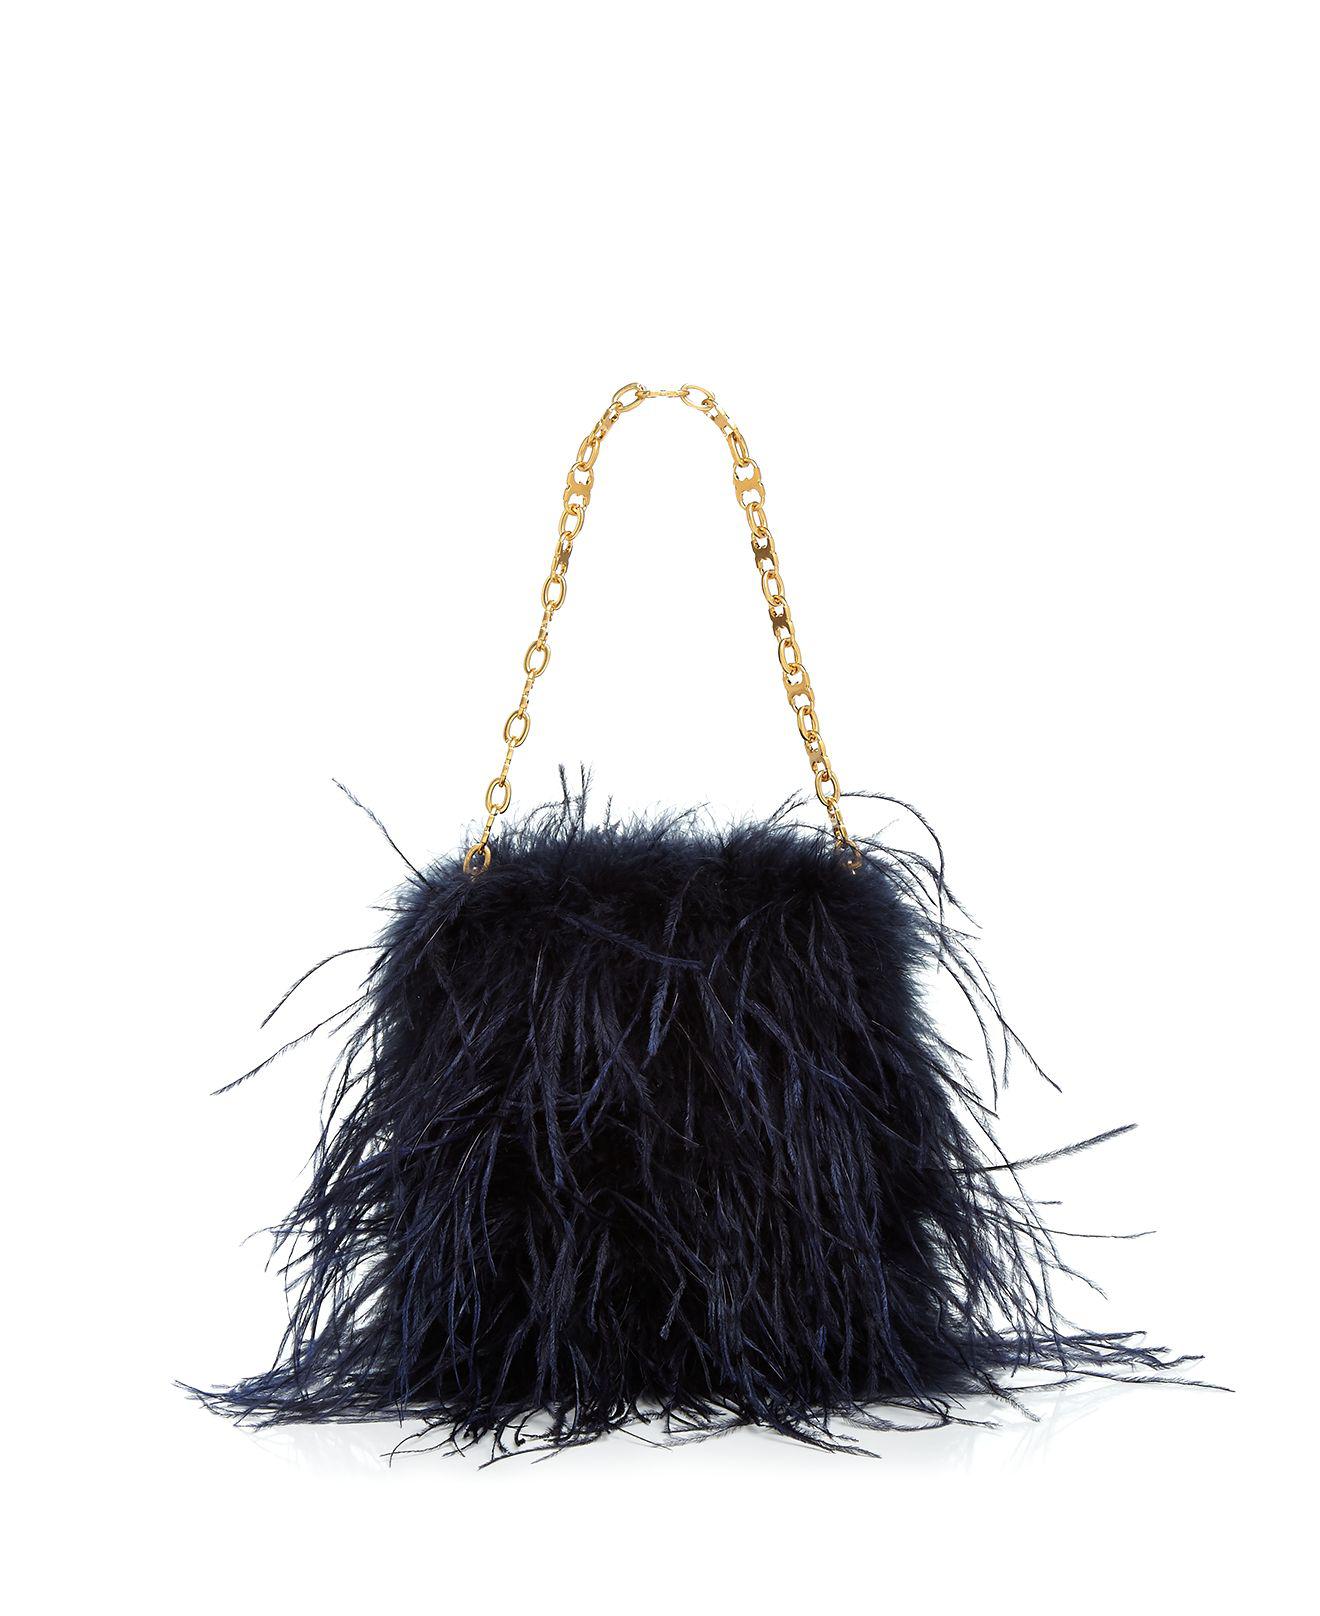 Tory Burch Ostrich Feather Mini Bag in Navy/Gold (Blue) - Lyst